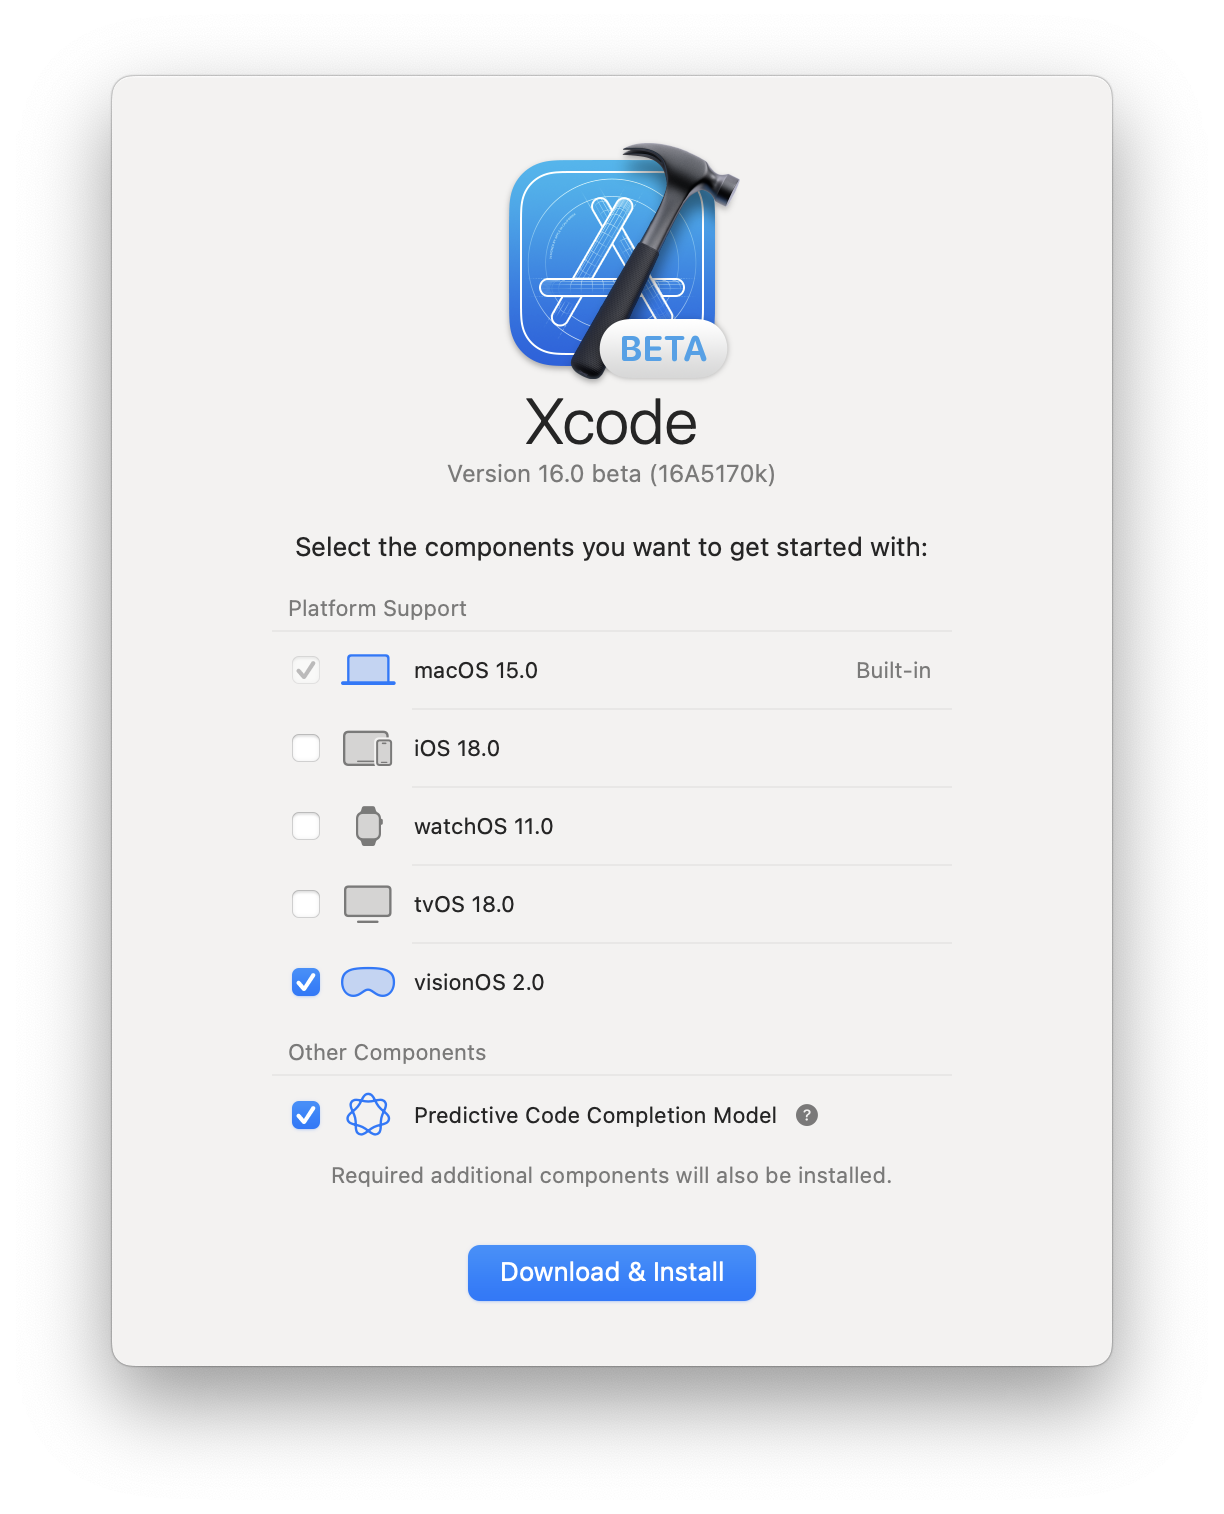 Xcode modal to selecct the components to get started with: macOS 15.0, iOS 18.0, watchOS 11.0, tvOS 18.0, visionOS 2.0, Predictive Code Completion Model; Required additional components will also be installed. Dowload & Install button.